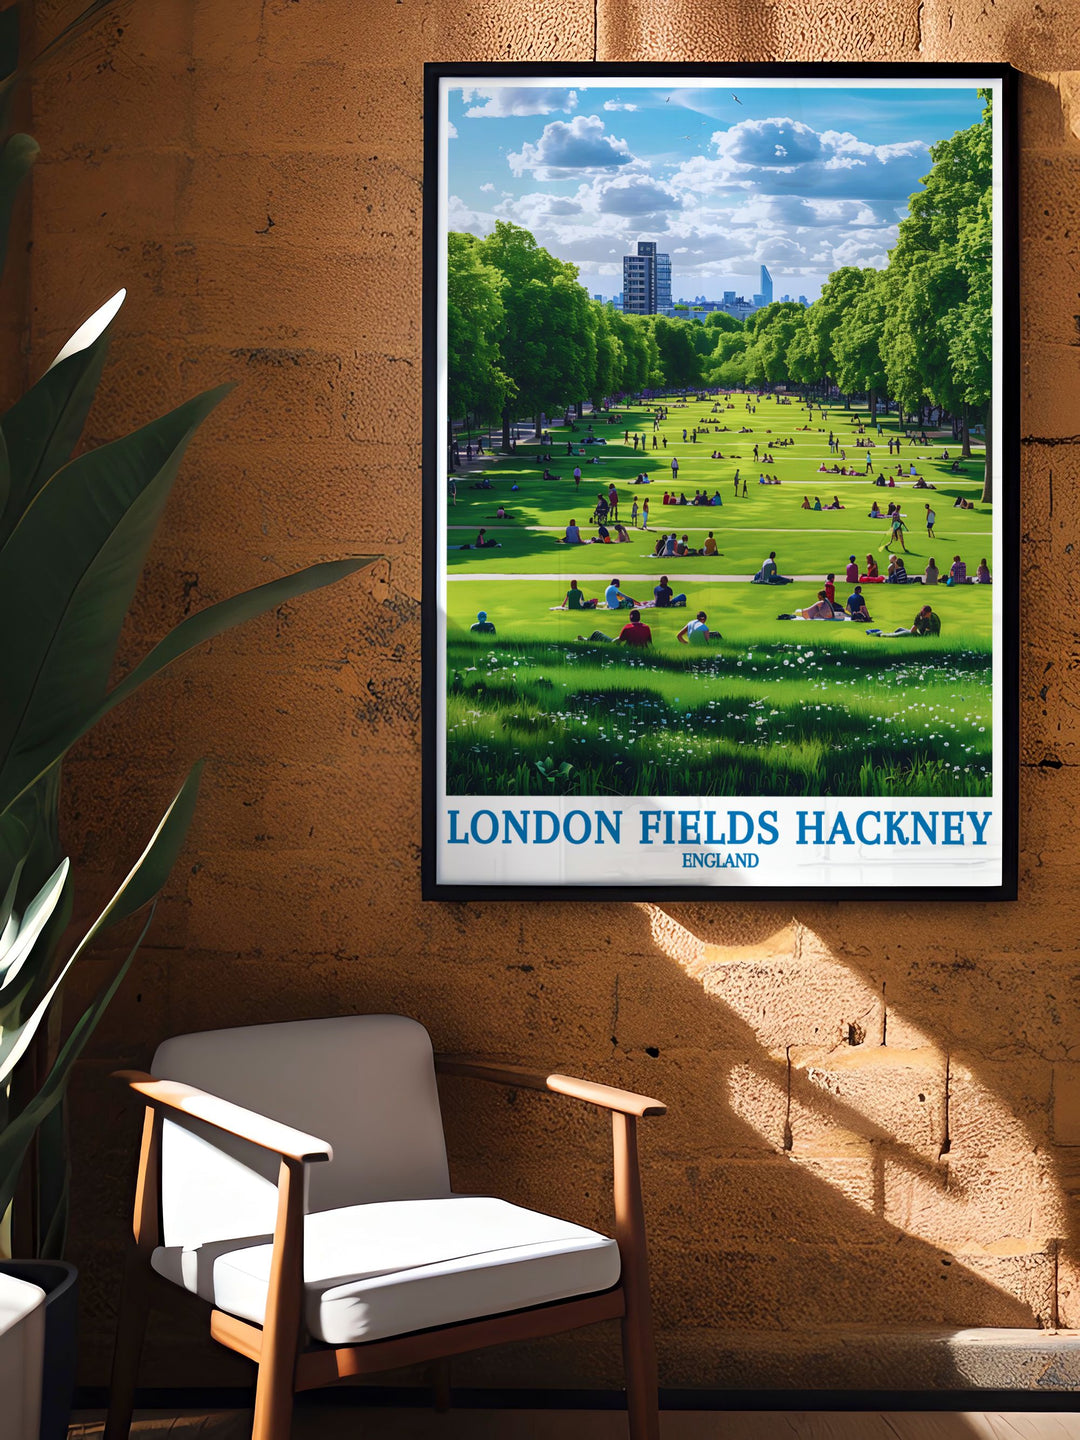 Bring the vibrant culture of Hackney into your home with this travel poster, capturing its bustling markets and eclectic community, ideal for any local culture enthusiast.